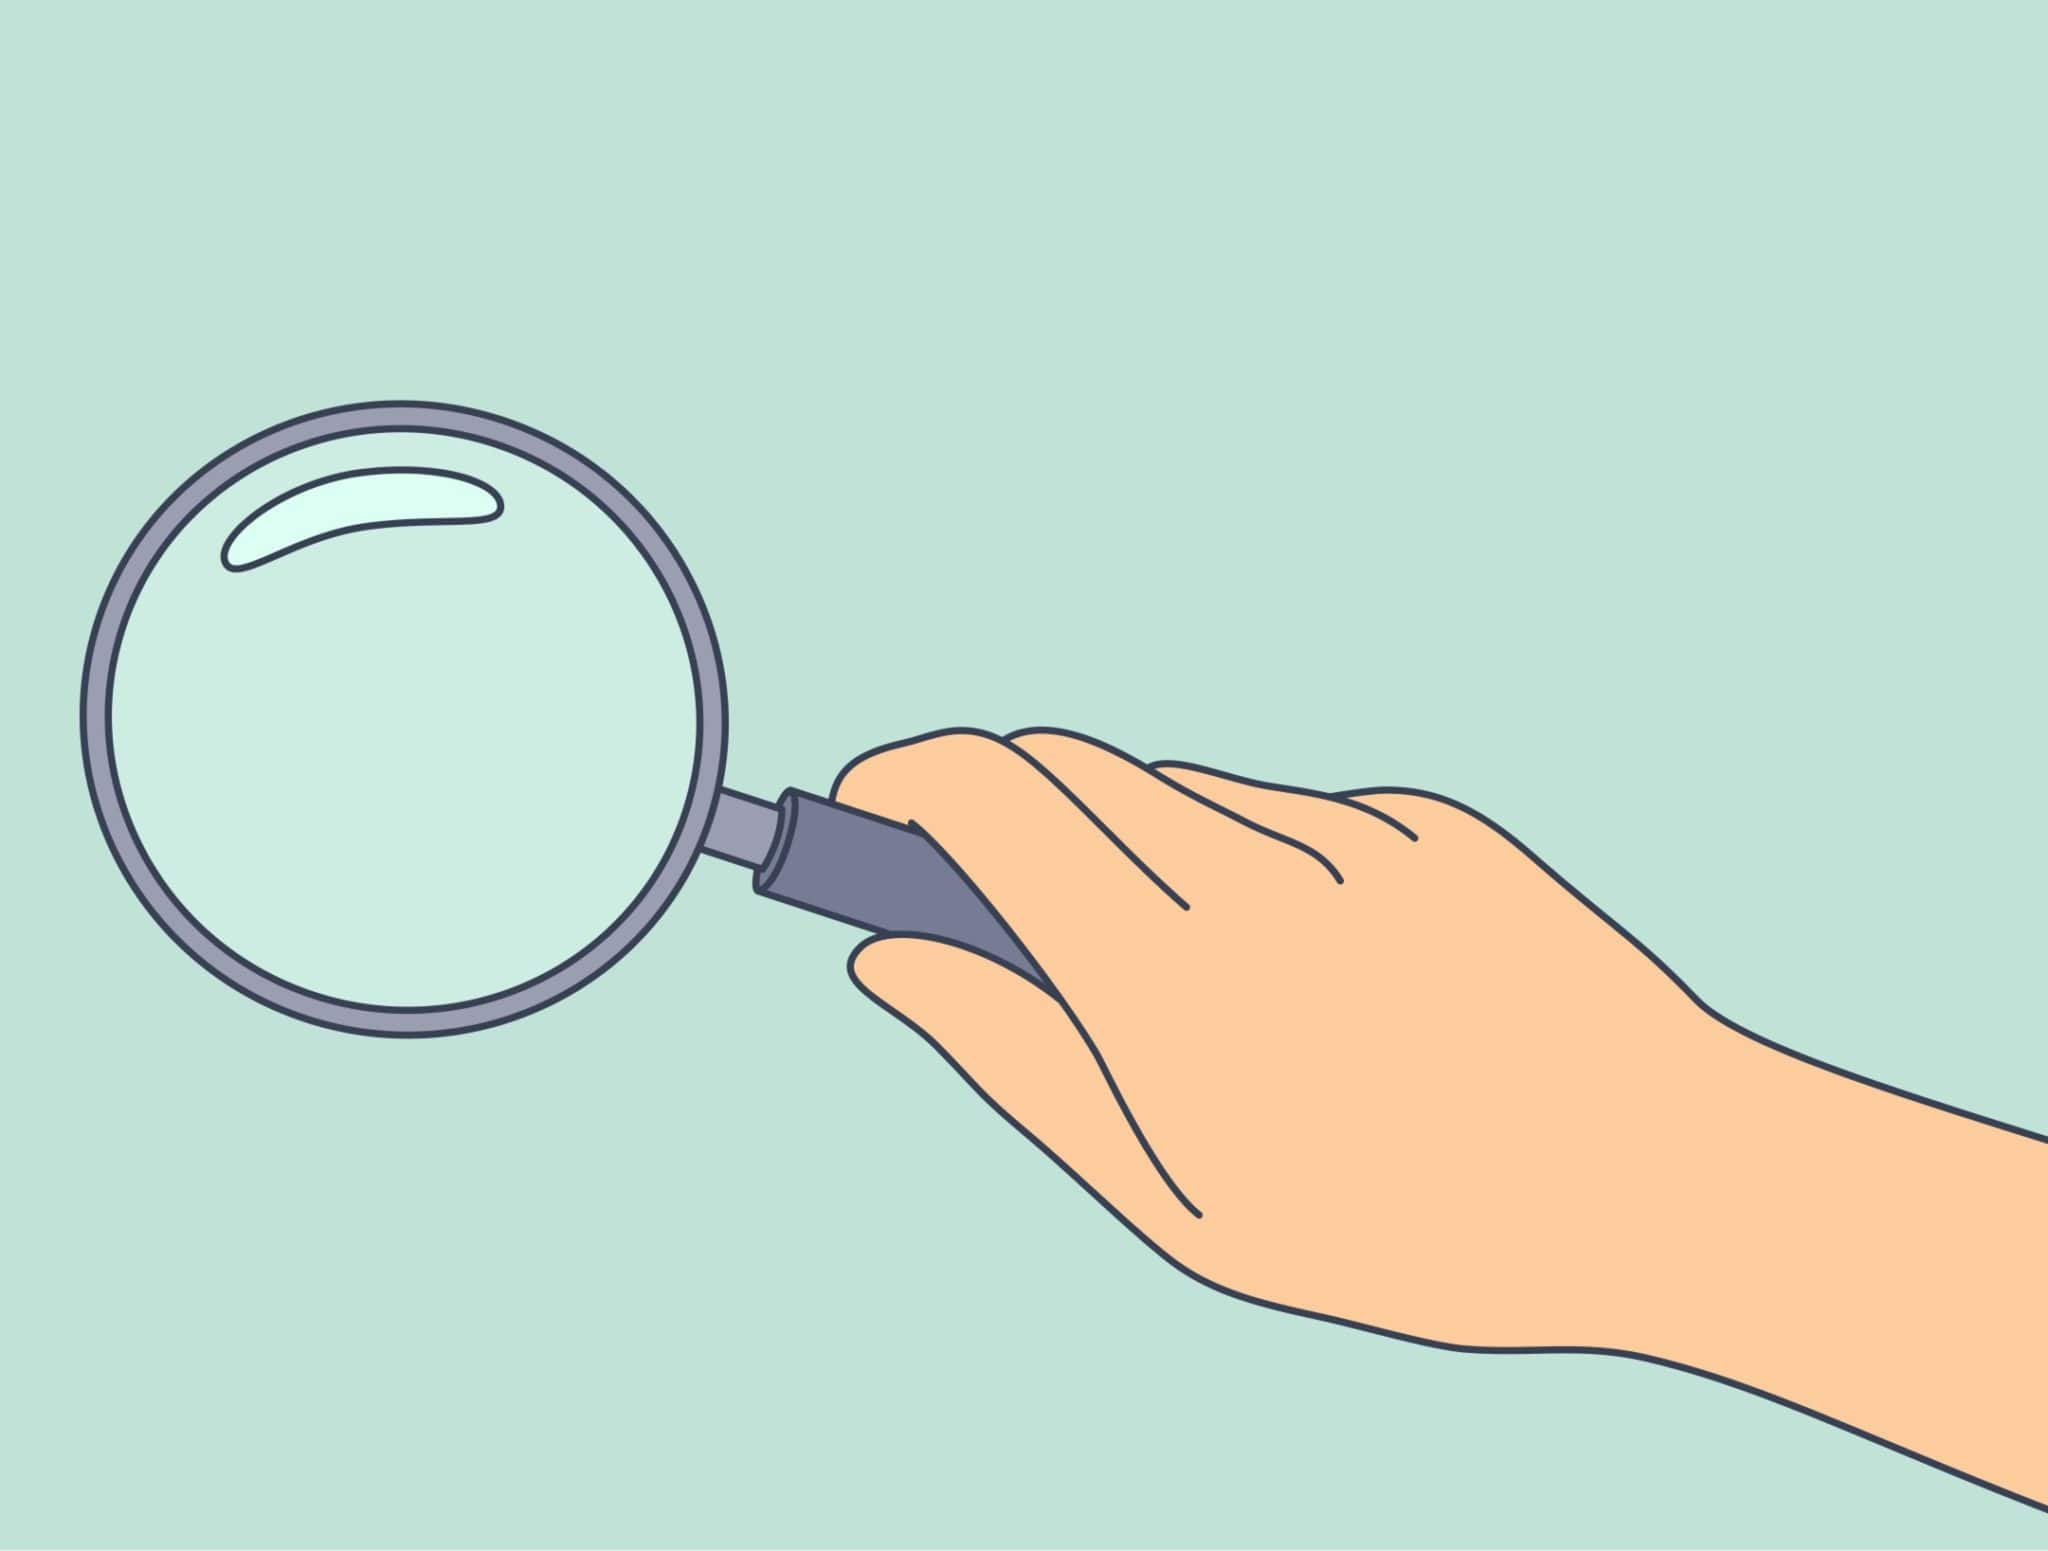 Cartoon of hand holding magnifying glass pointing to left, against mint green background